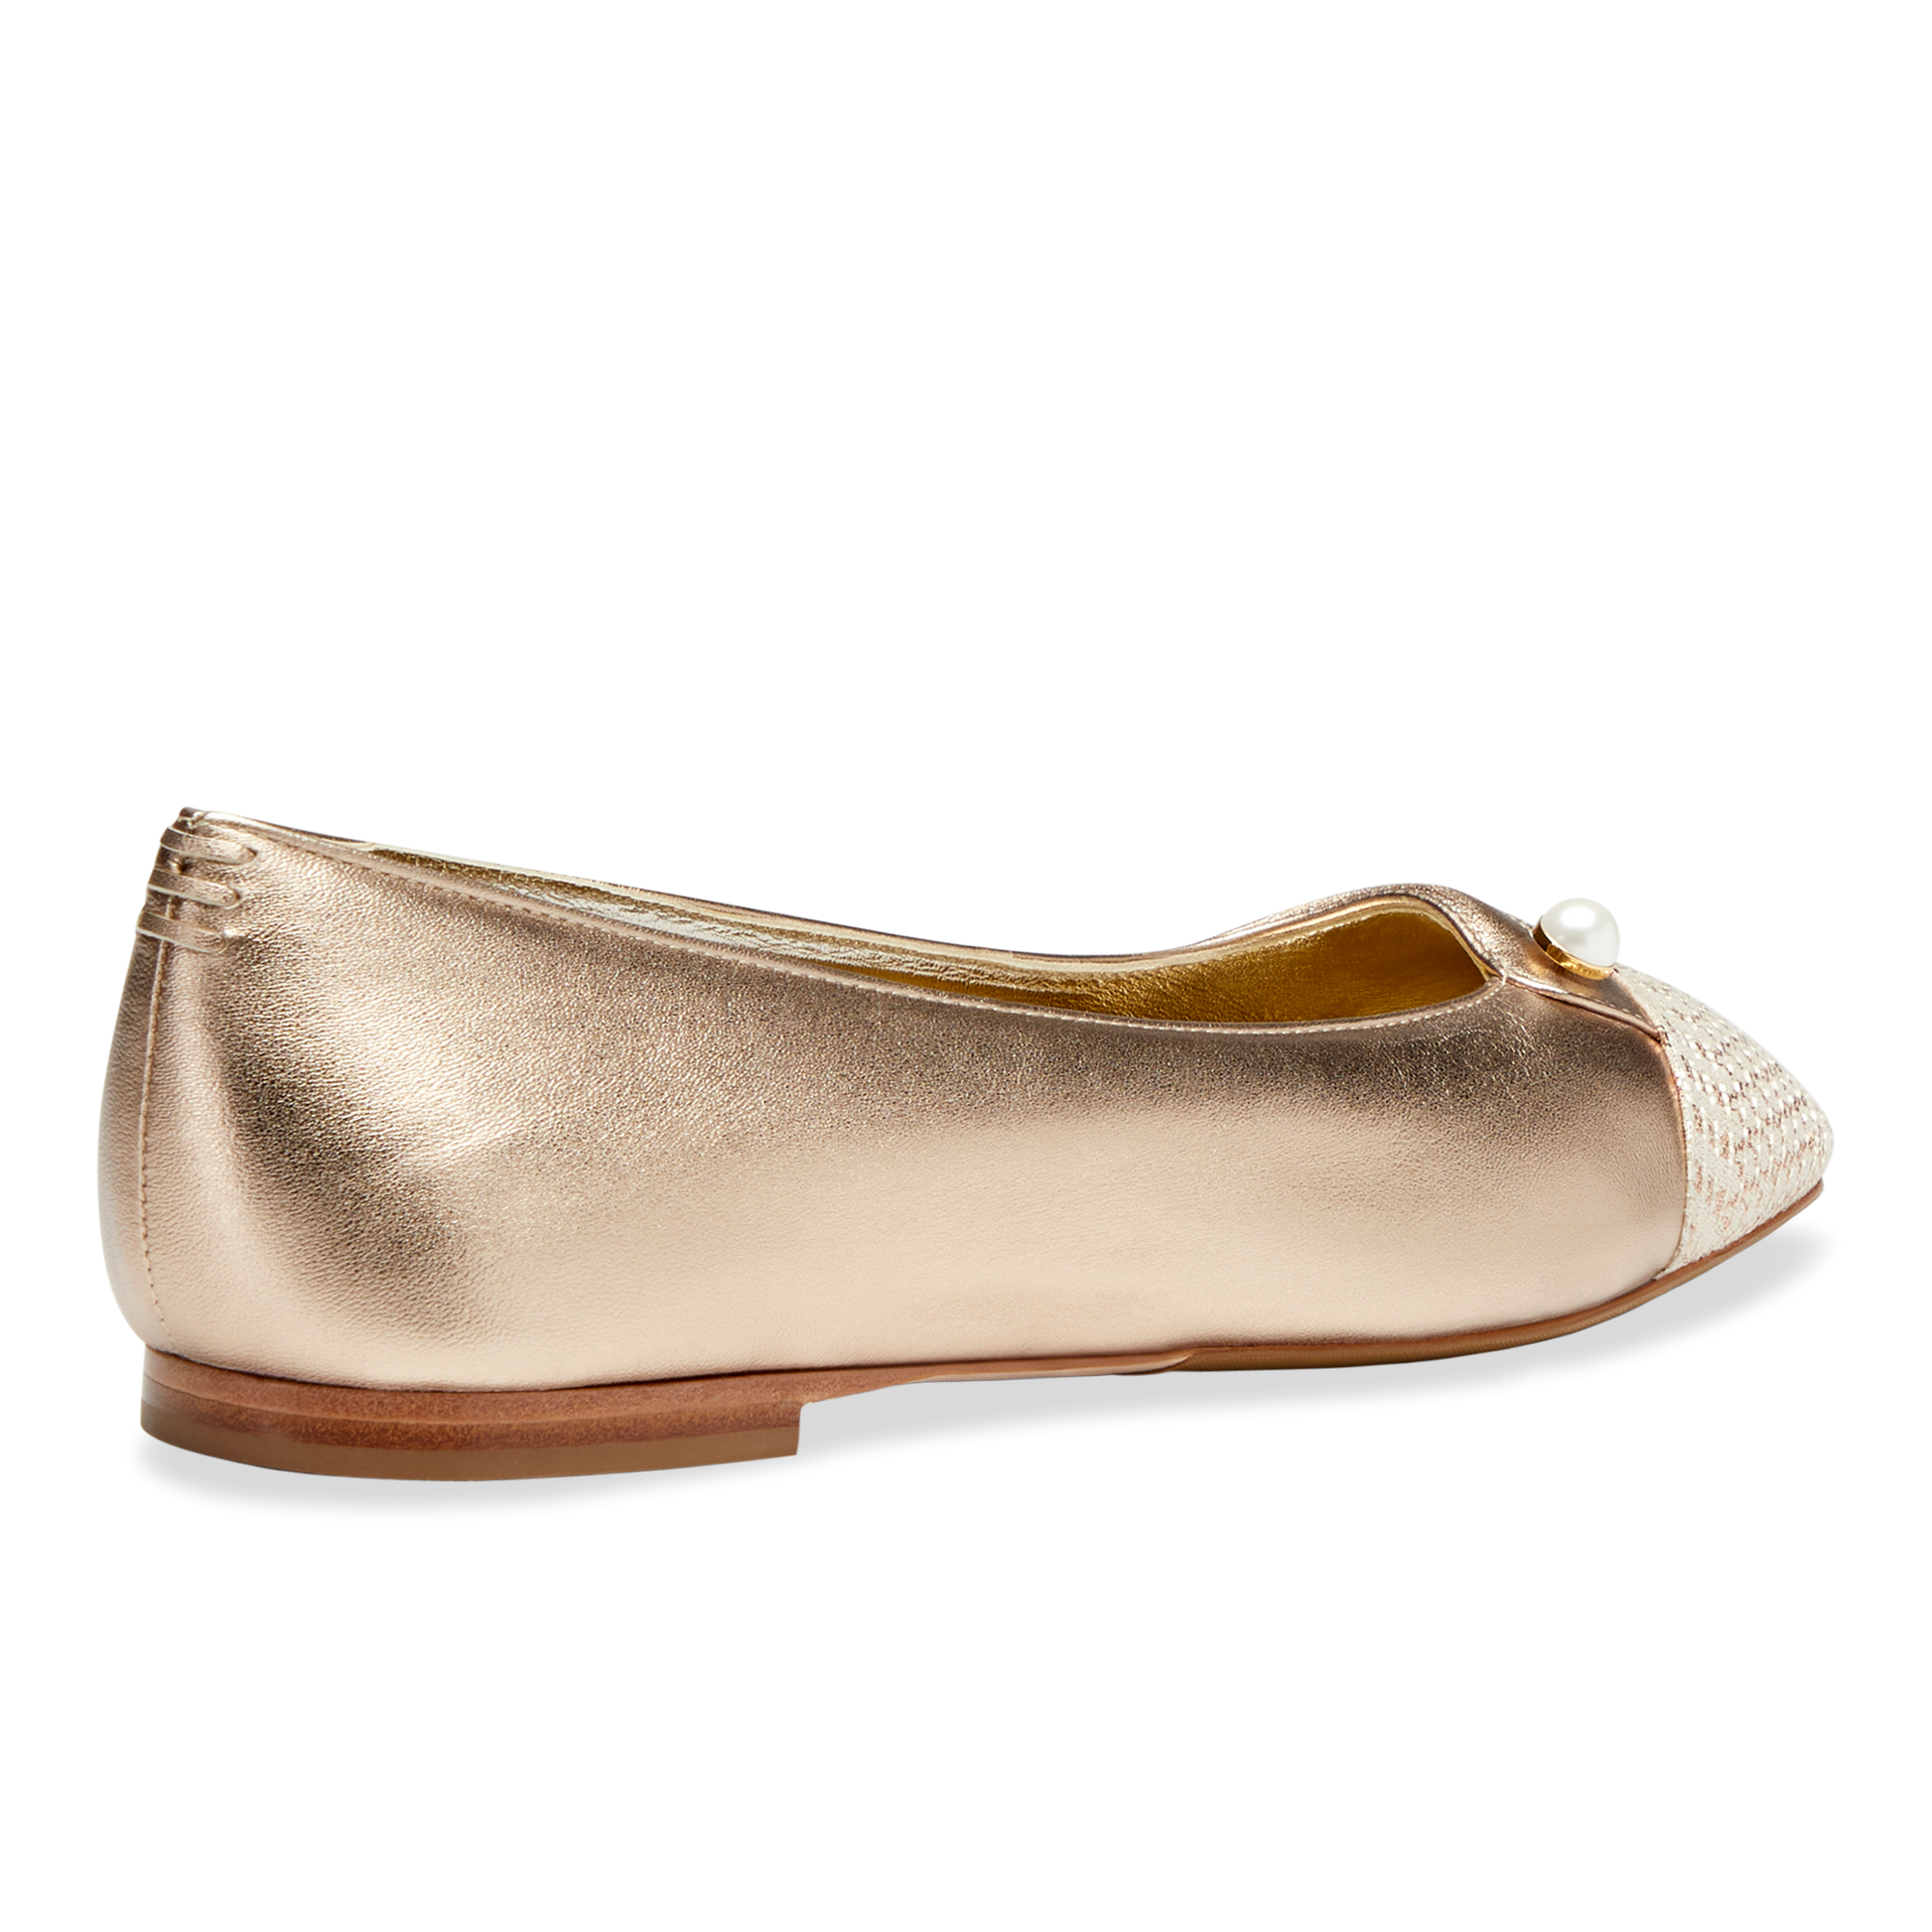 A soft and flexible version of the classic ballet flat, in rose gold nappa with a shimmer textile cap toe.